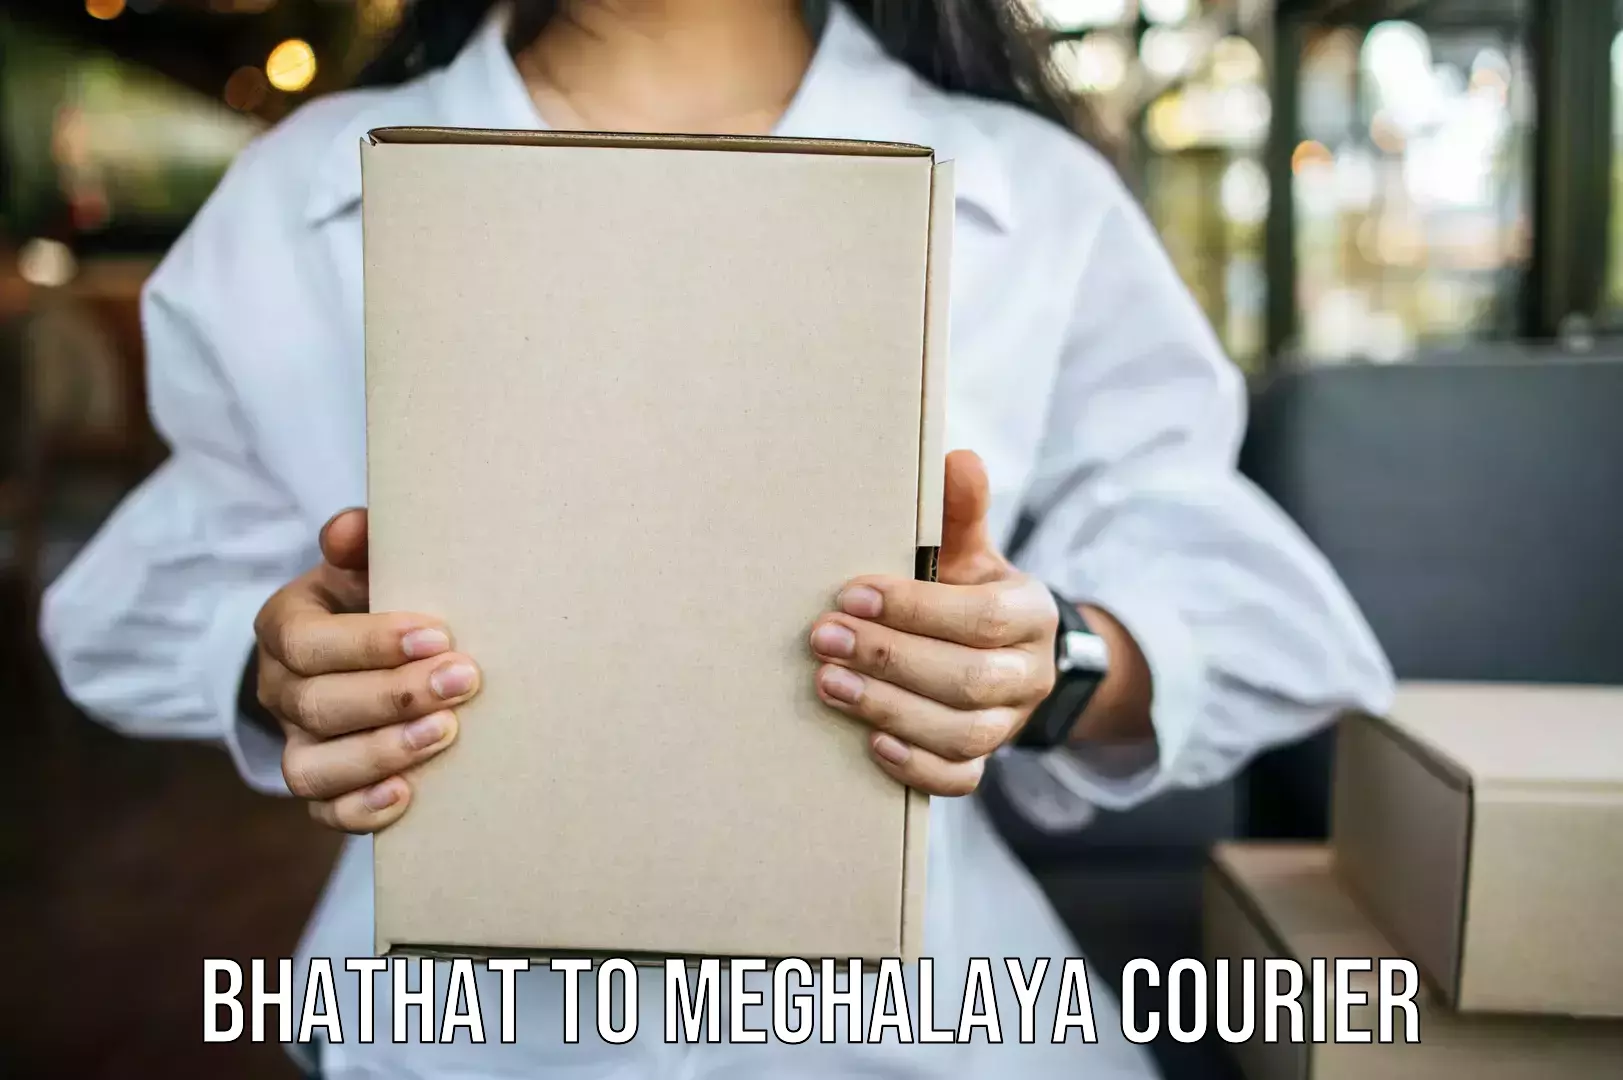 Skilled furniture movers Bhathat to Meghalaya